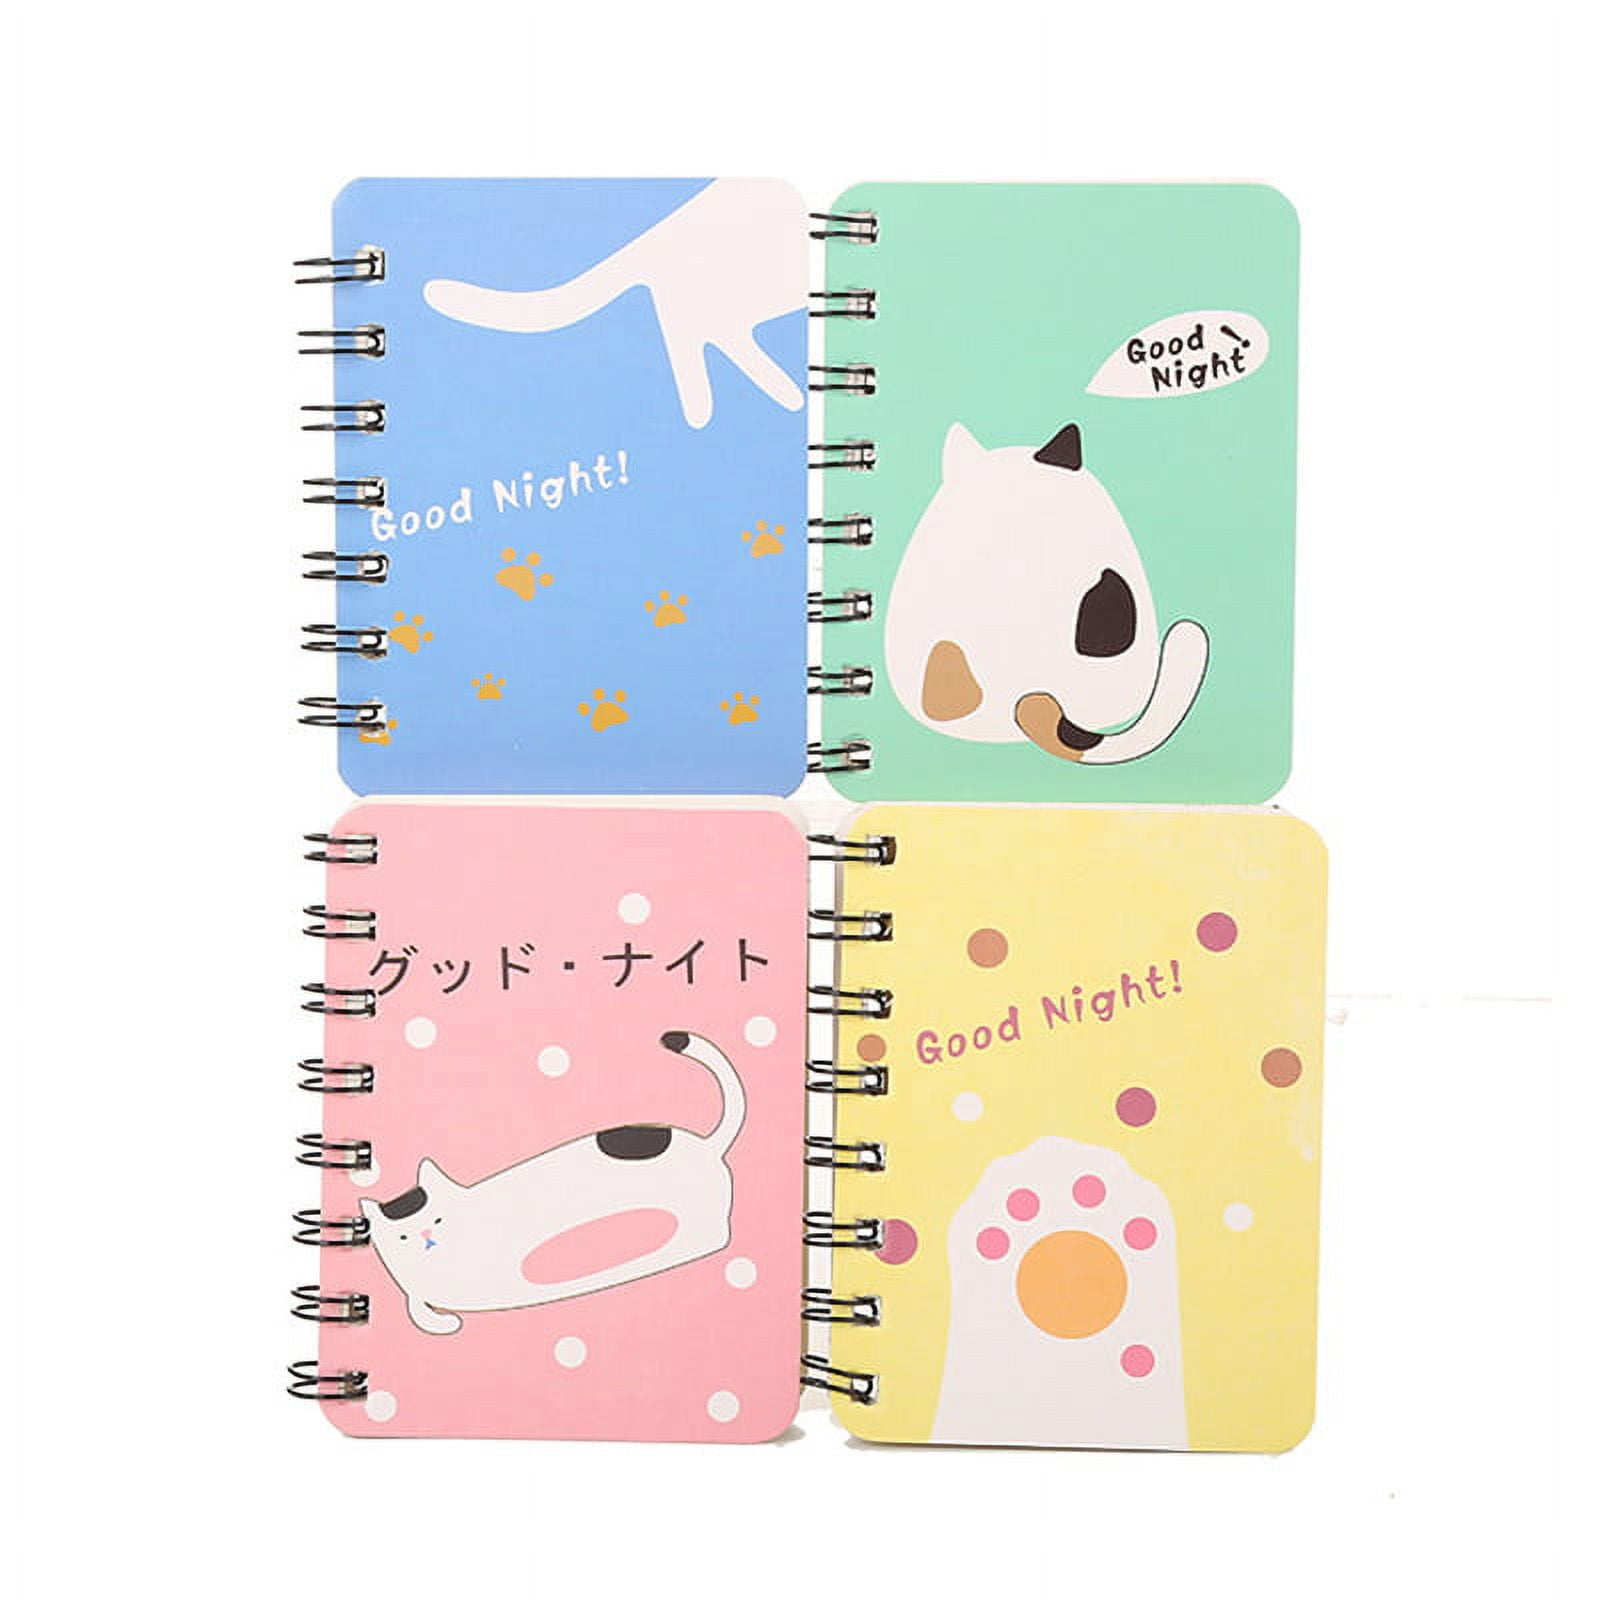 Small Square 5x5 104 Sheets 80gsm Mini Notebooks Blank Pages Sketchbooks  Travel Journal Pocket Hardcover Paint Writing Notebook Blank Diary Memo